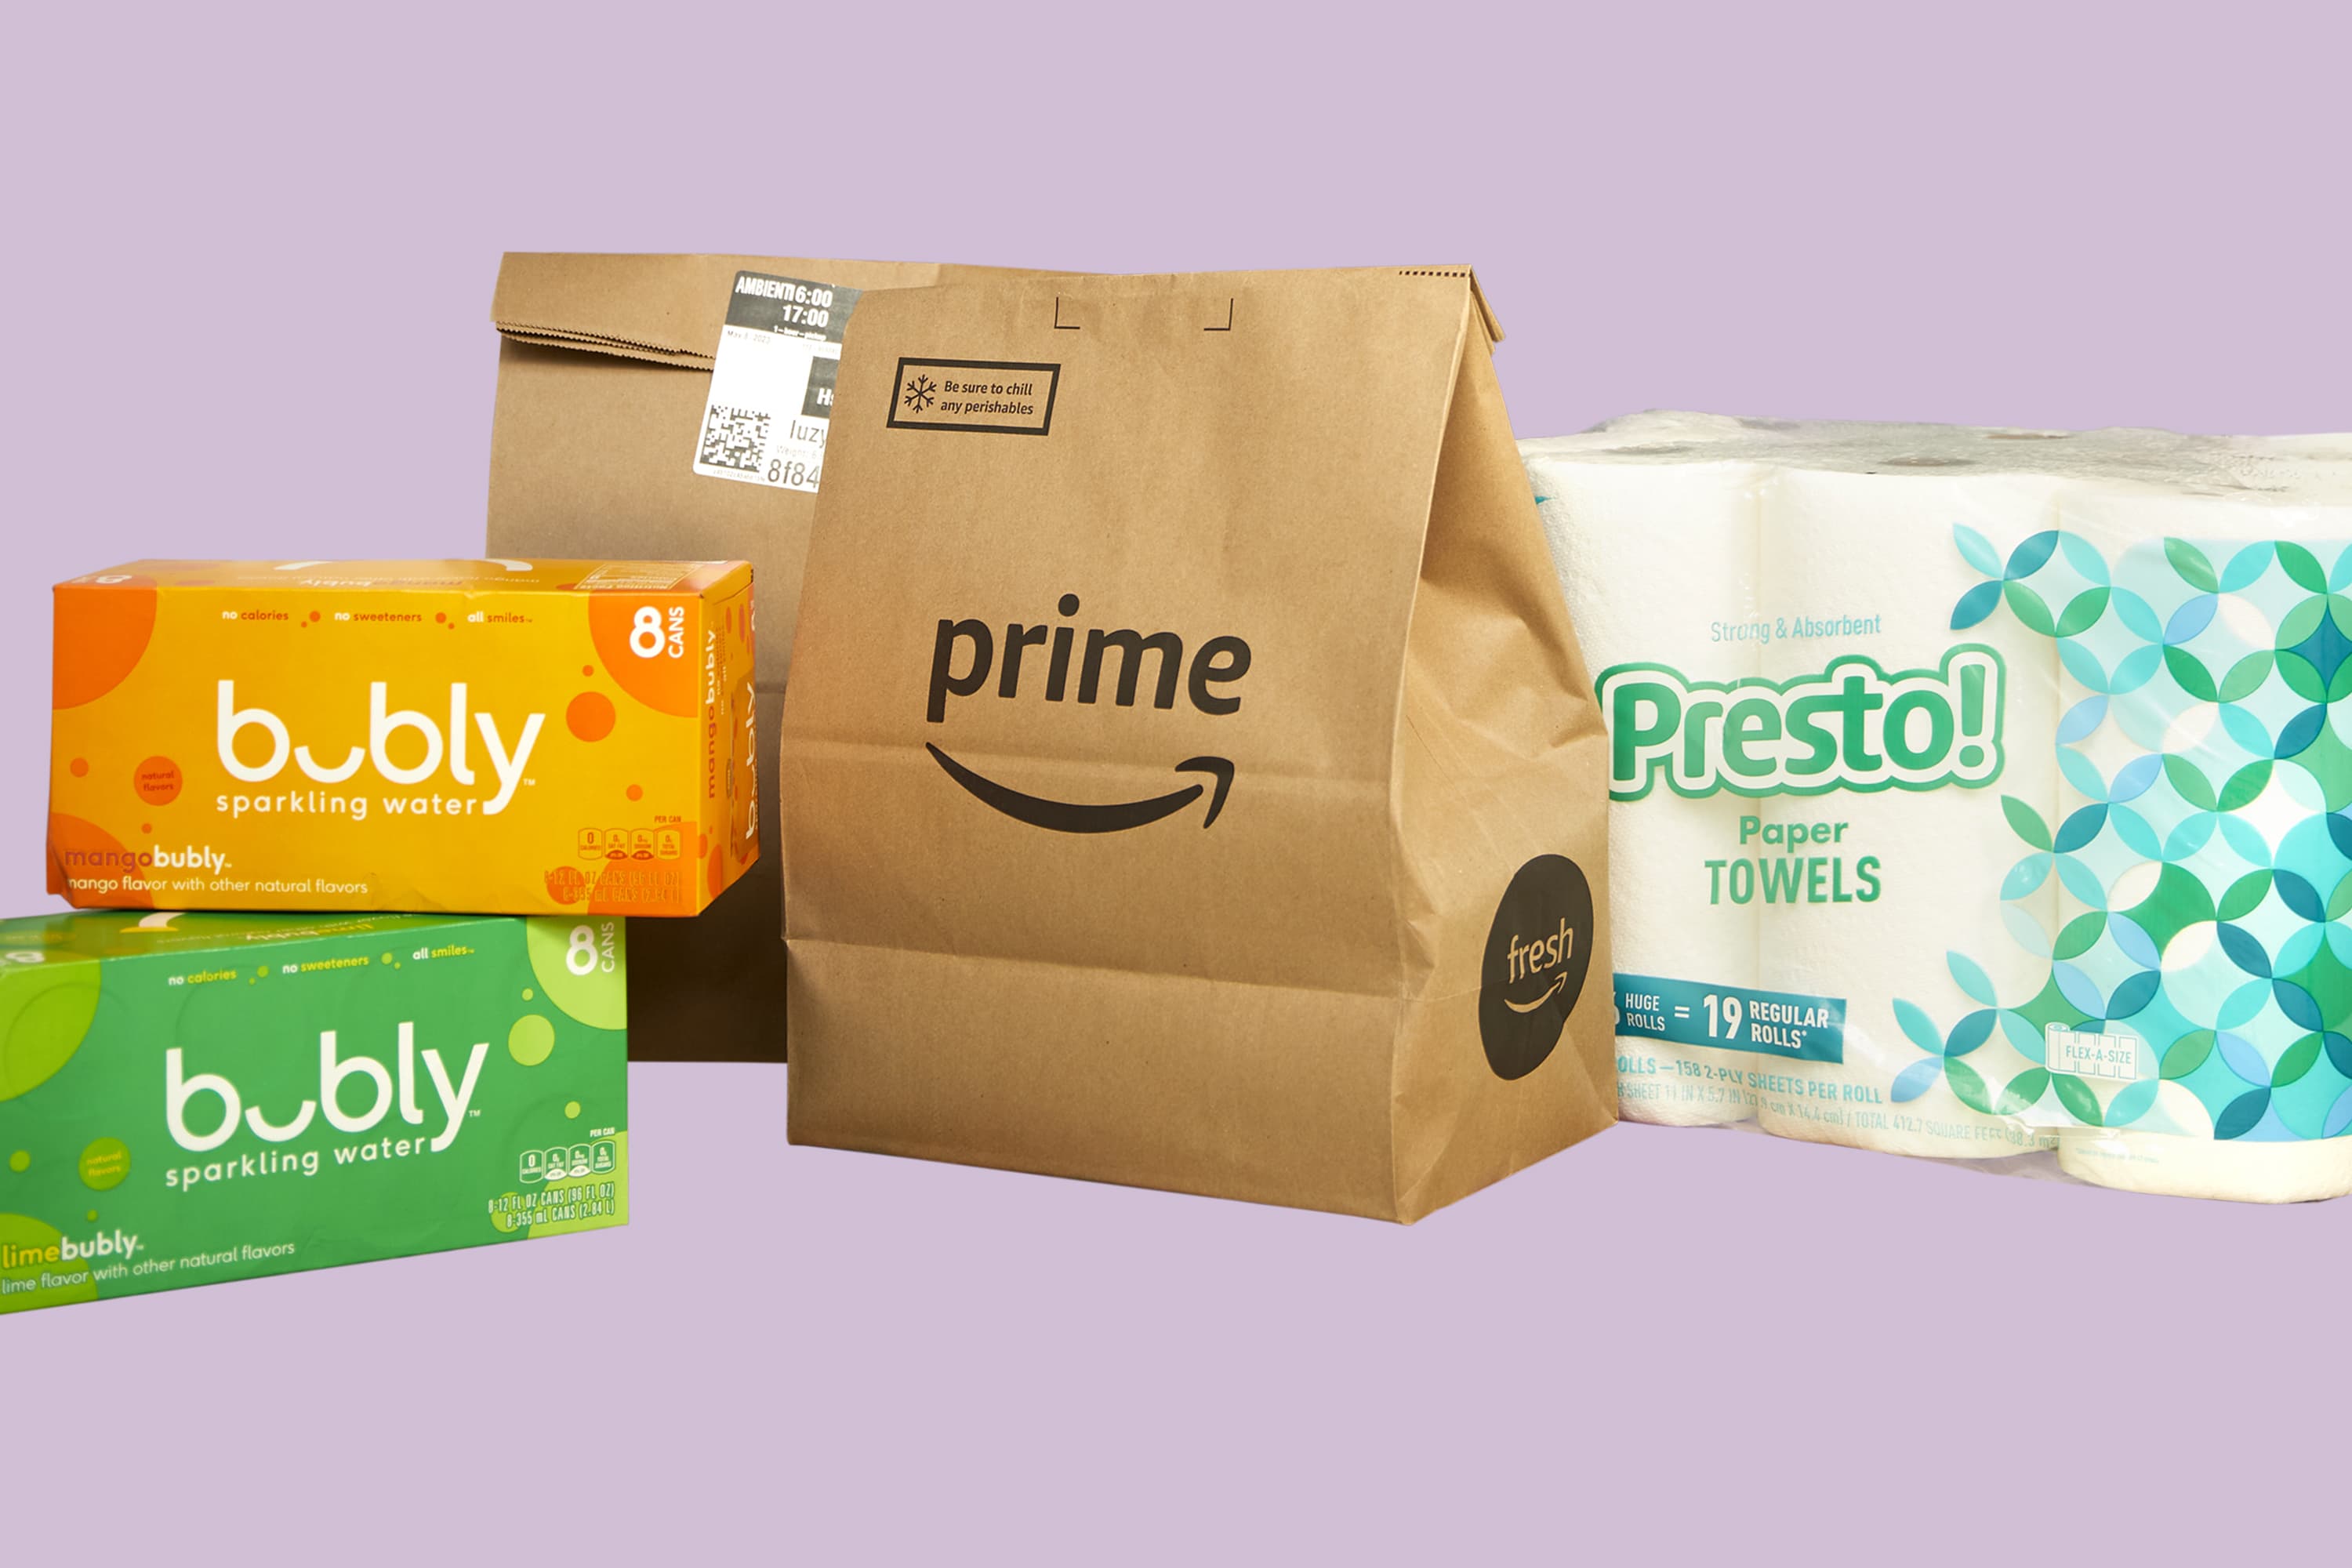 5 Grocery Delivery Services That Ship Meat, Produce, and Pantry